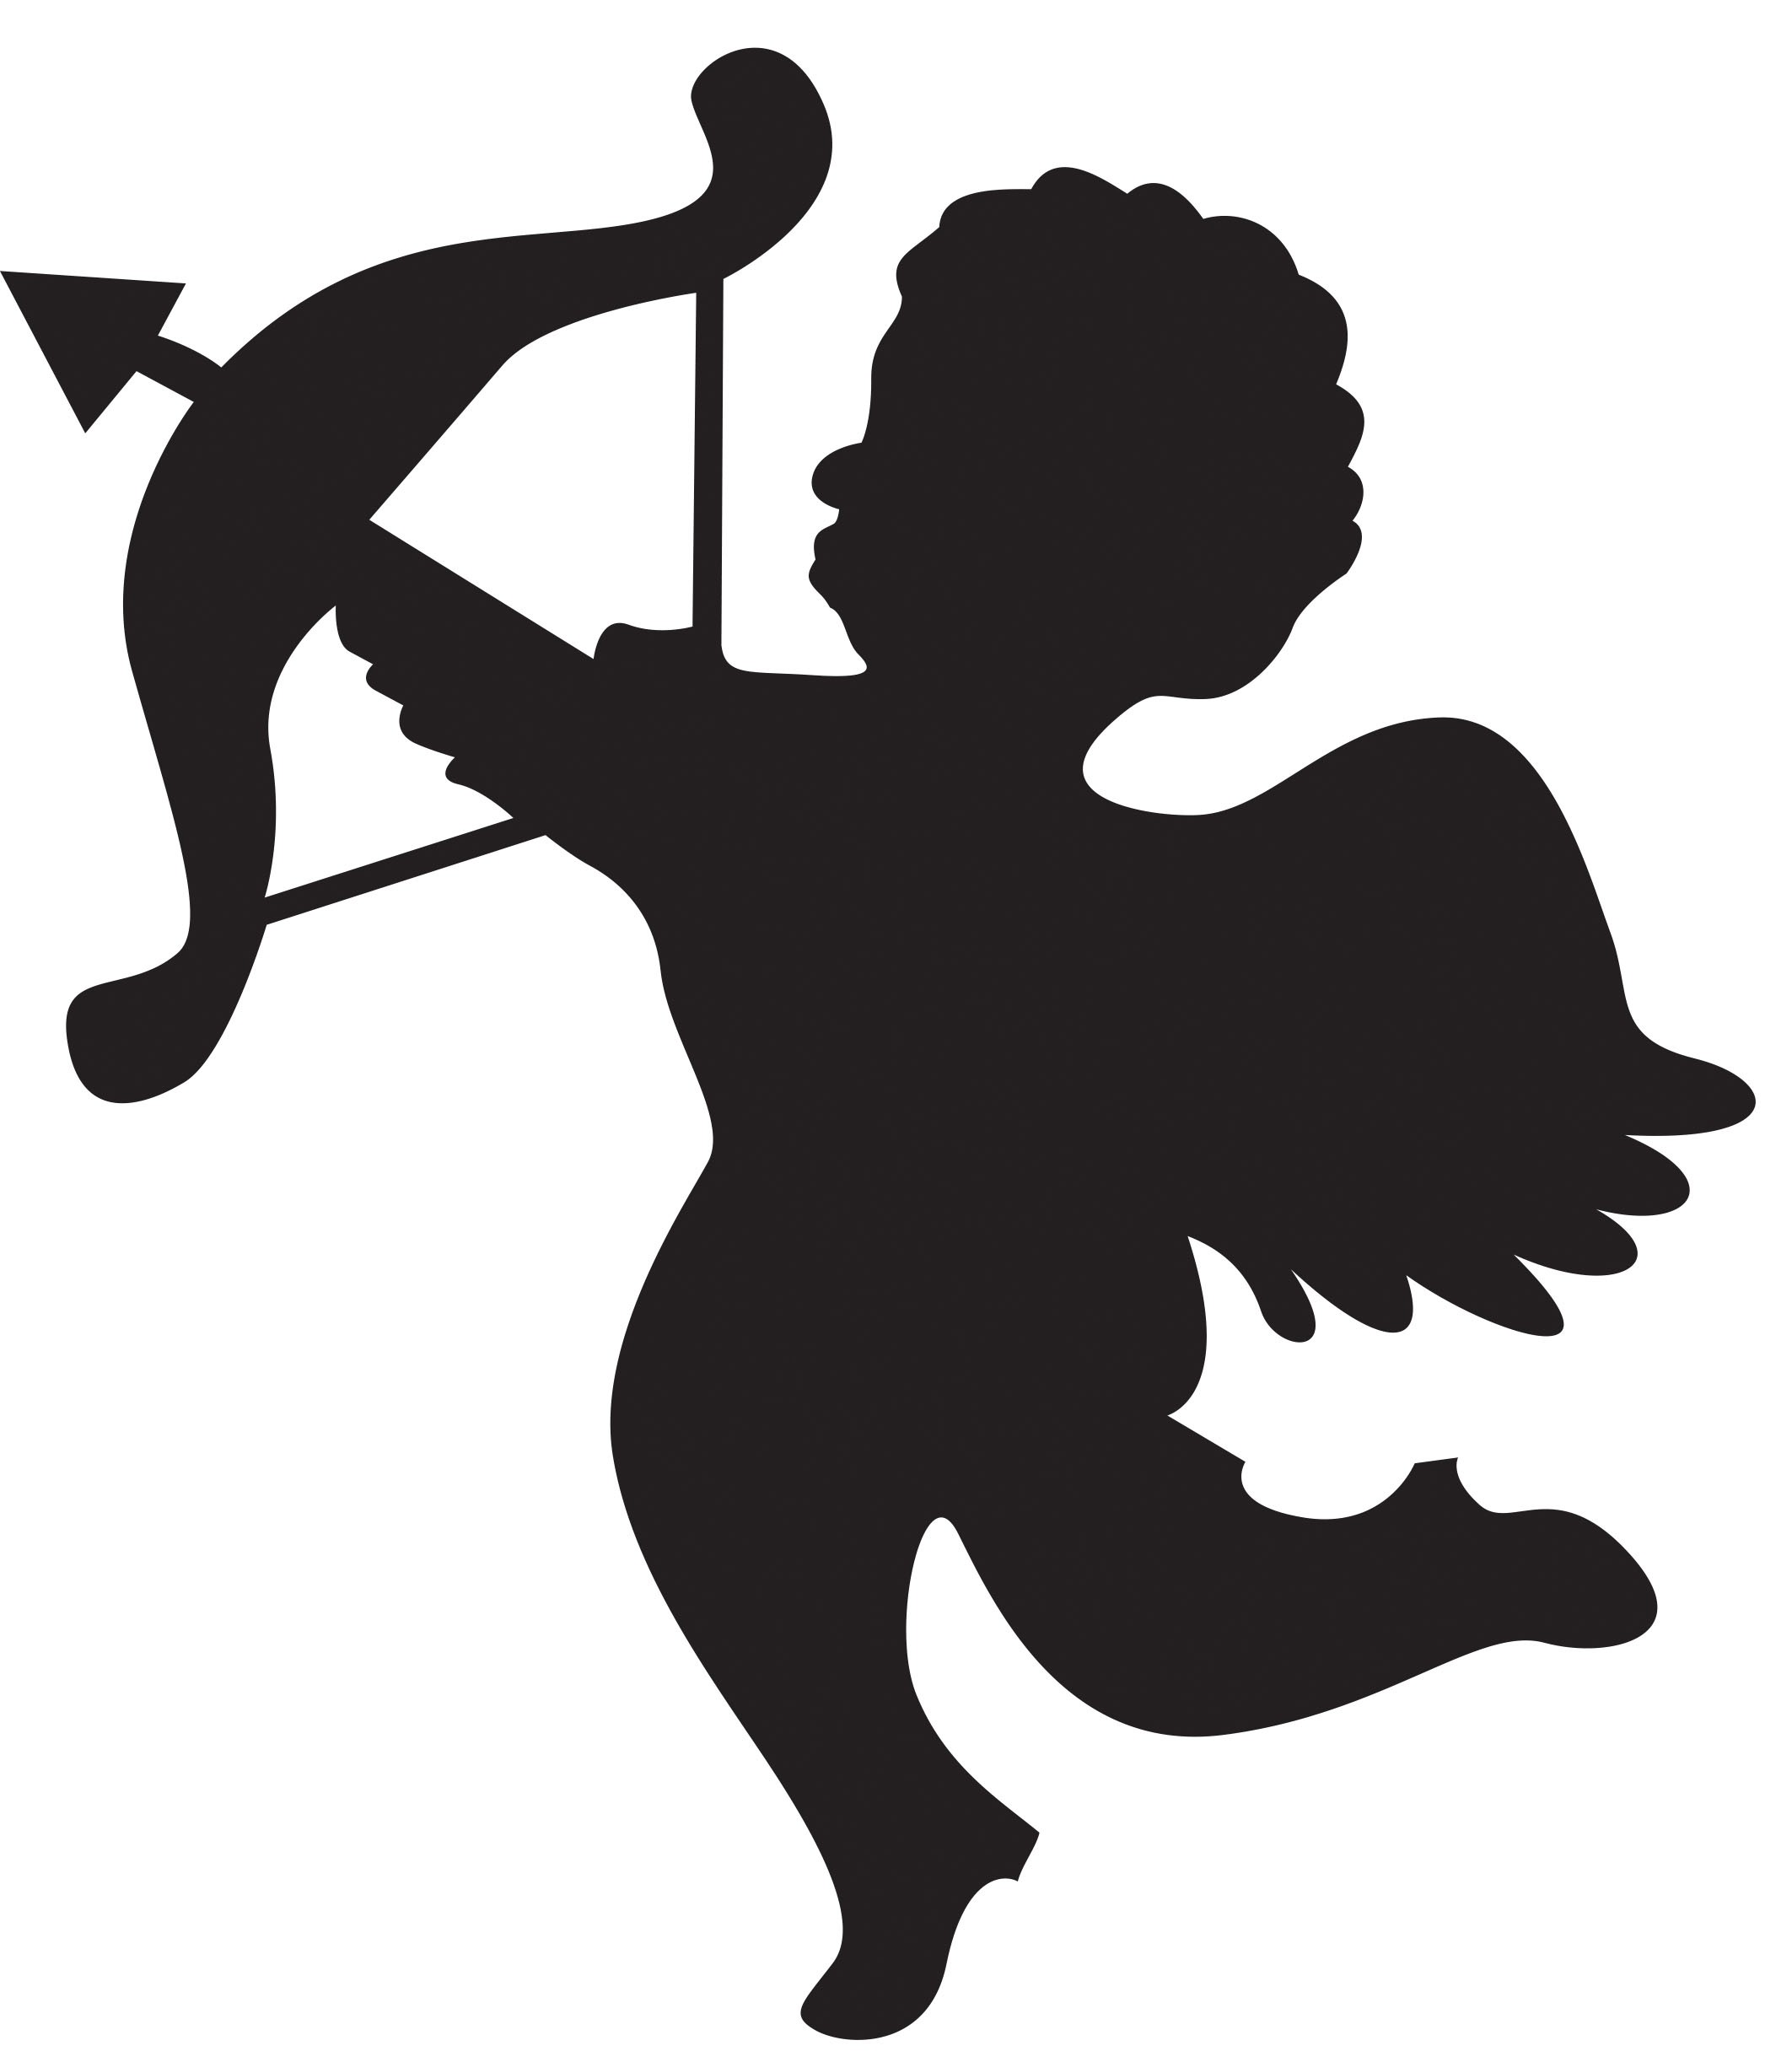 Image of Cupid Clipart Black and White #9137, Cupid Outline cupid ...